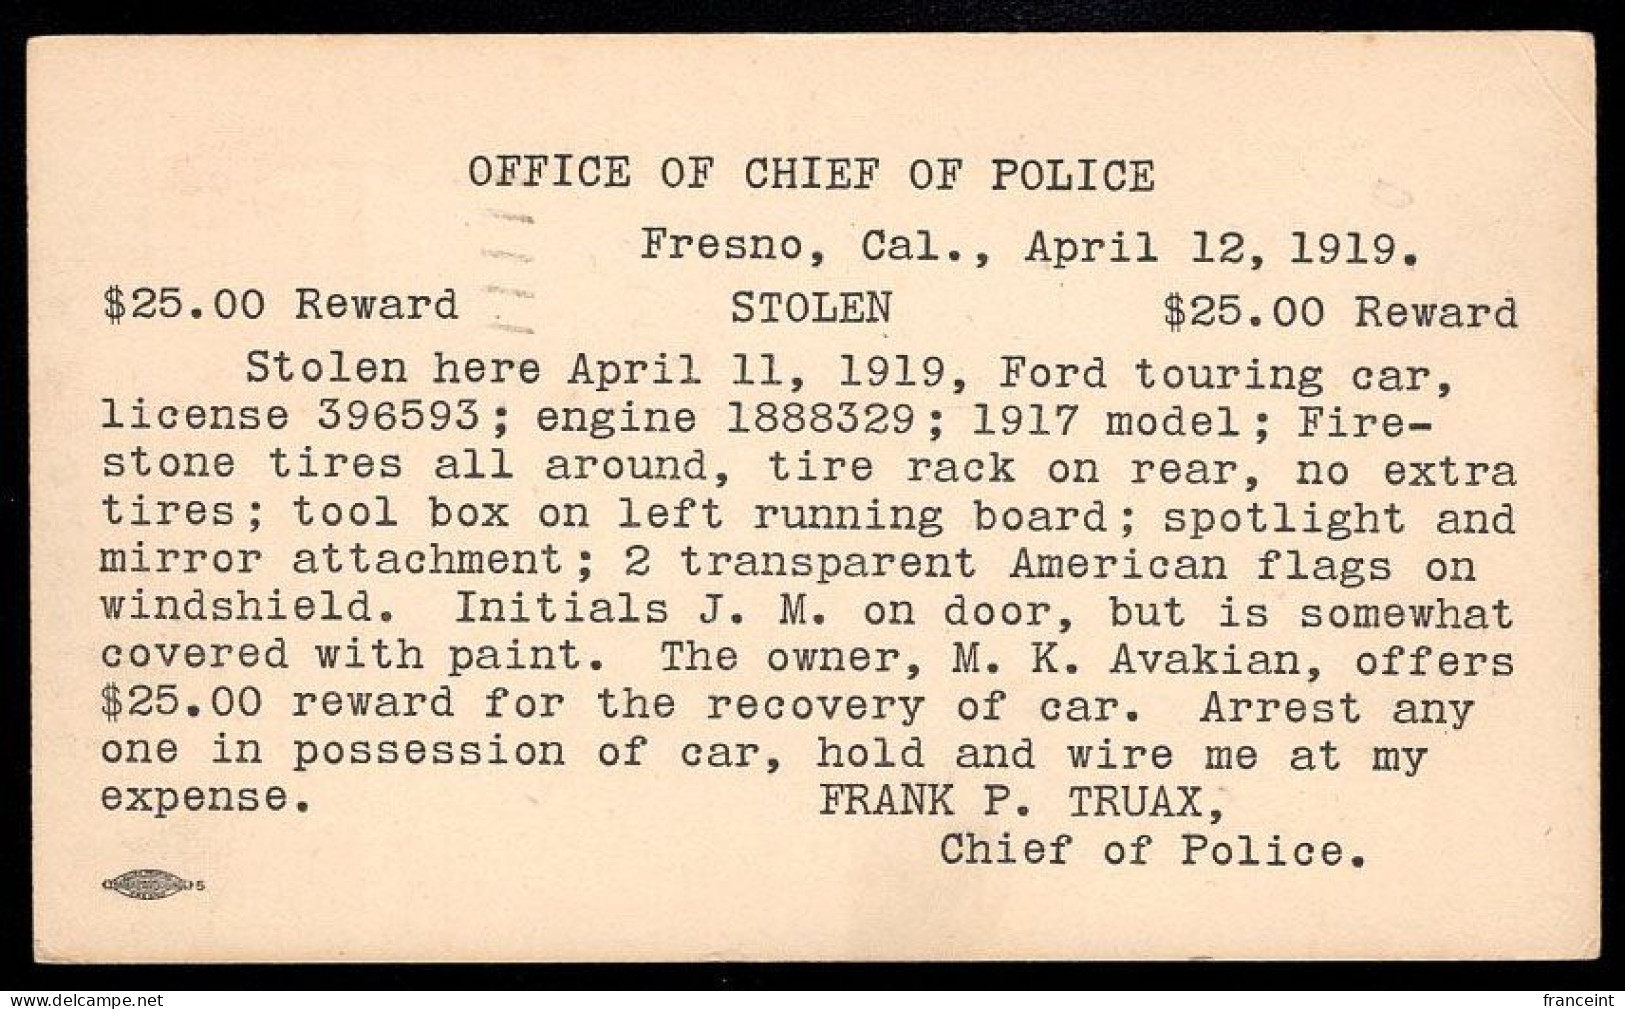 U.S.A.(1919) Auto Theft Reward Card. 2c Postal Card From Chief Of Police, Offering $25 Reward For Recovery Of 1917 Ford - Cartes Souvenir